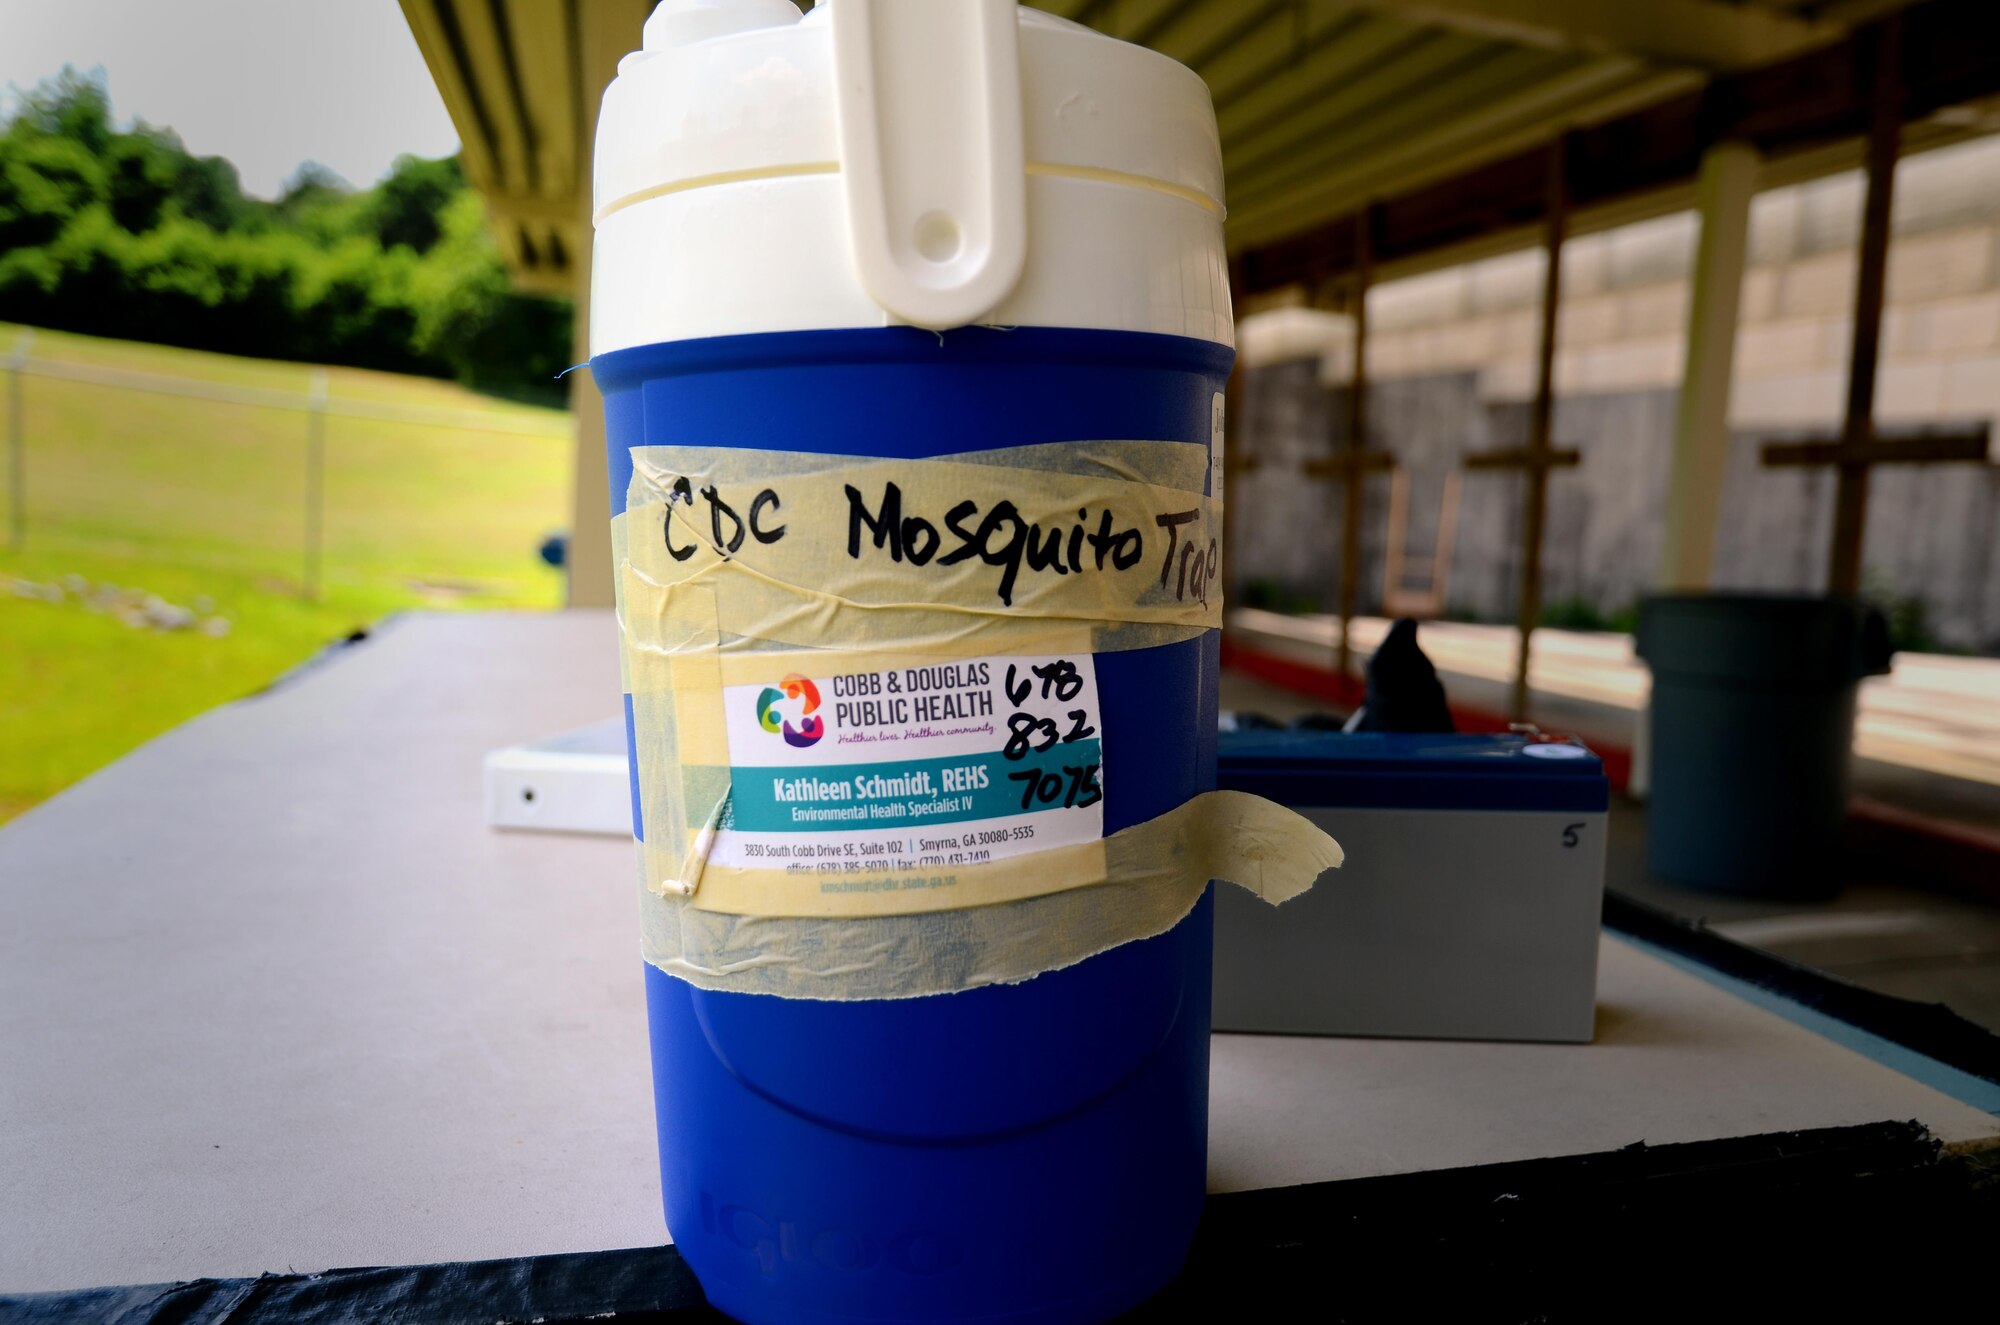 A mosquito trap sits on a table at the firing range before being set up Dobbins Air Reserve Base, Ga., on June 23, 2017. The Georgia Department of Public Health came to Dobbins to set up mosquito traps following a Department of Defense initiative to combat the Zika virus. (U.S. Air Force photo by Staff Sgt. Daniel Phelps)